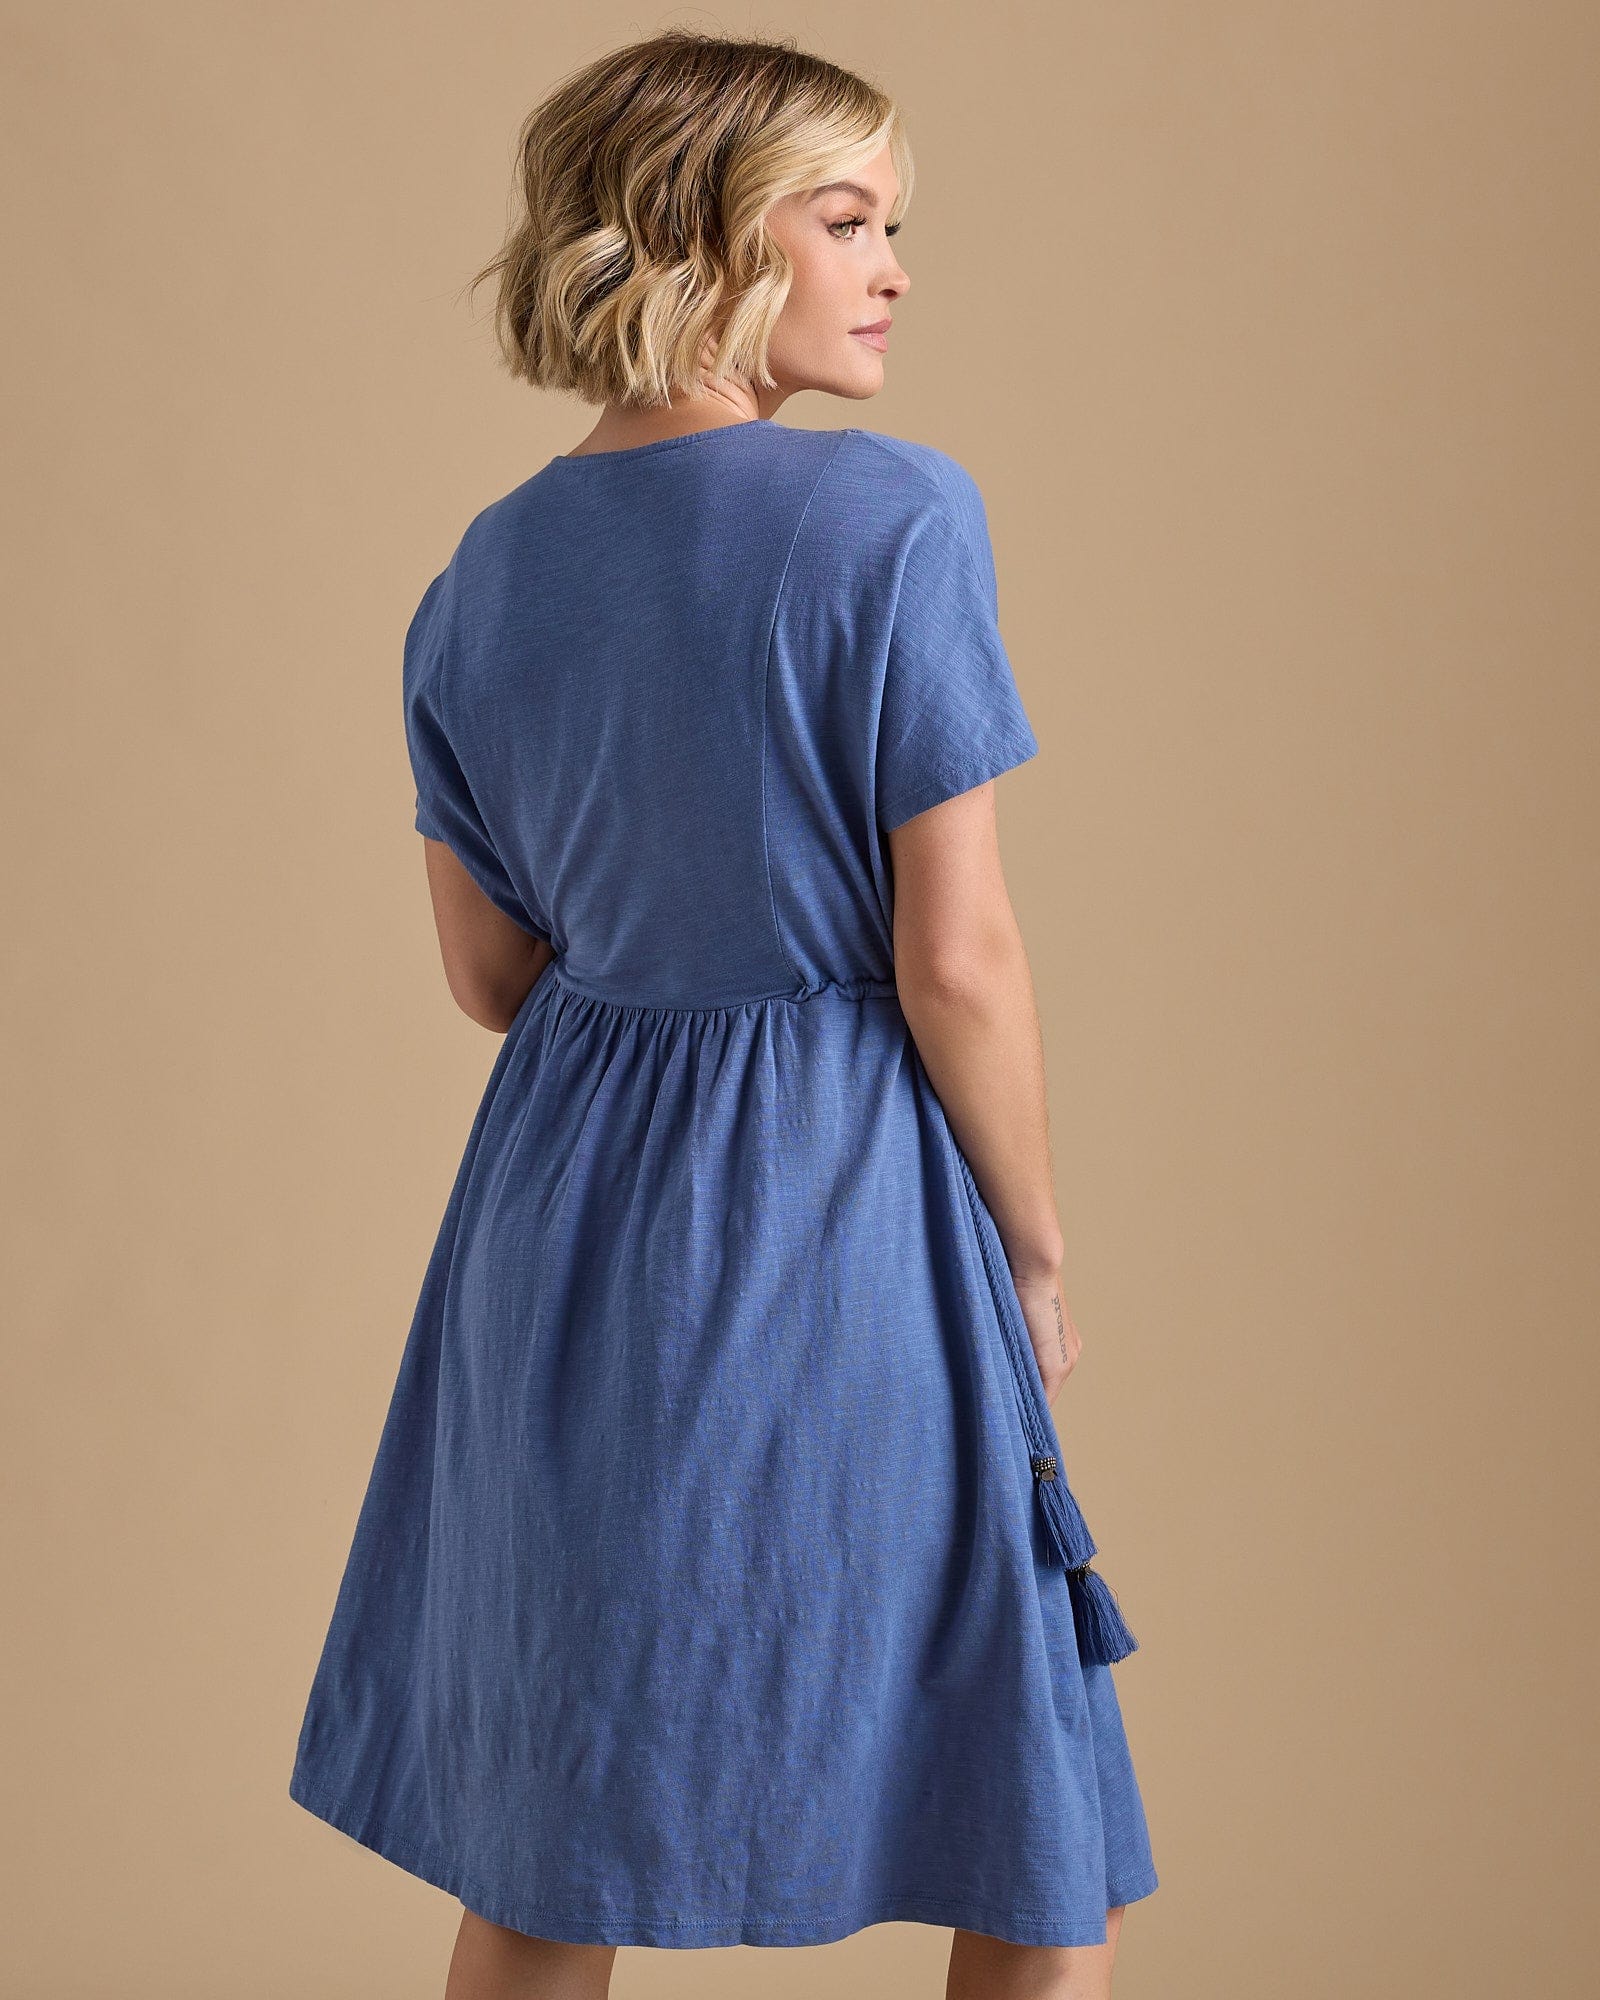 Woman in a short sleeve, pleated front, knee-length, blue drss